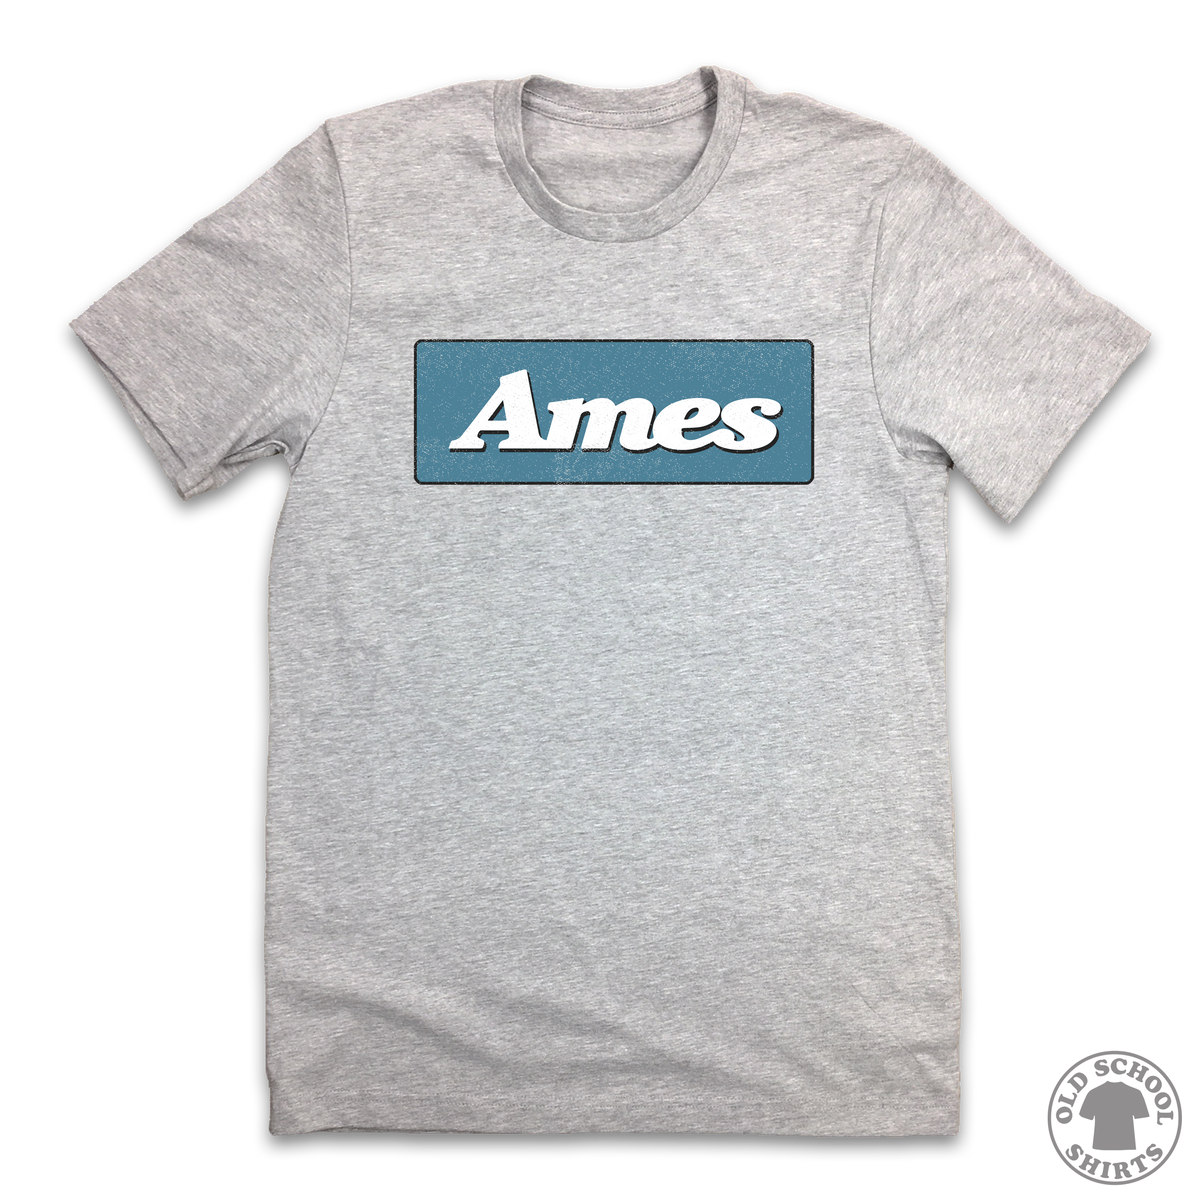 Ames Department Store - Old School Shirts- Retro Sports T Shirts